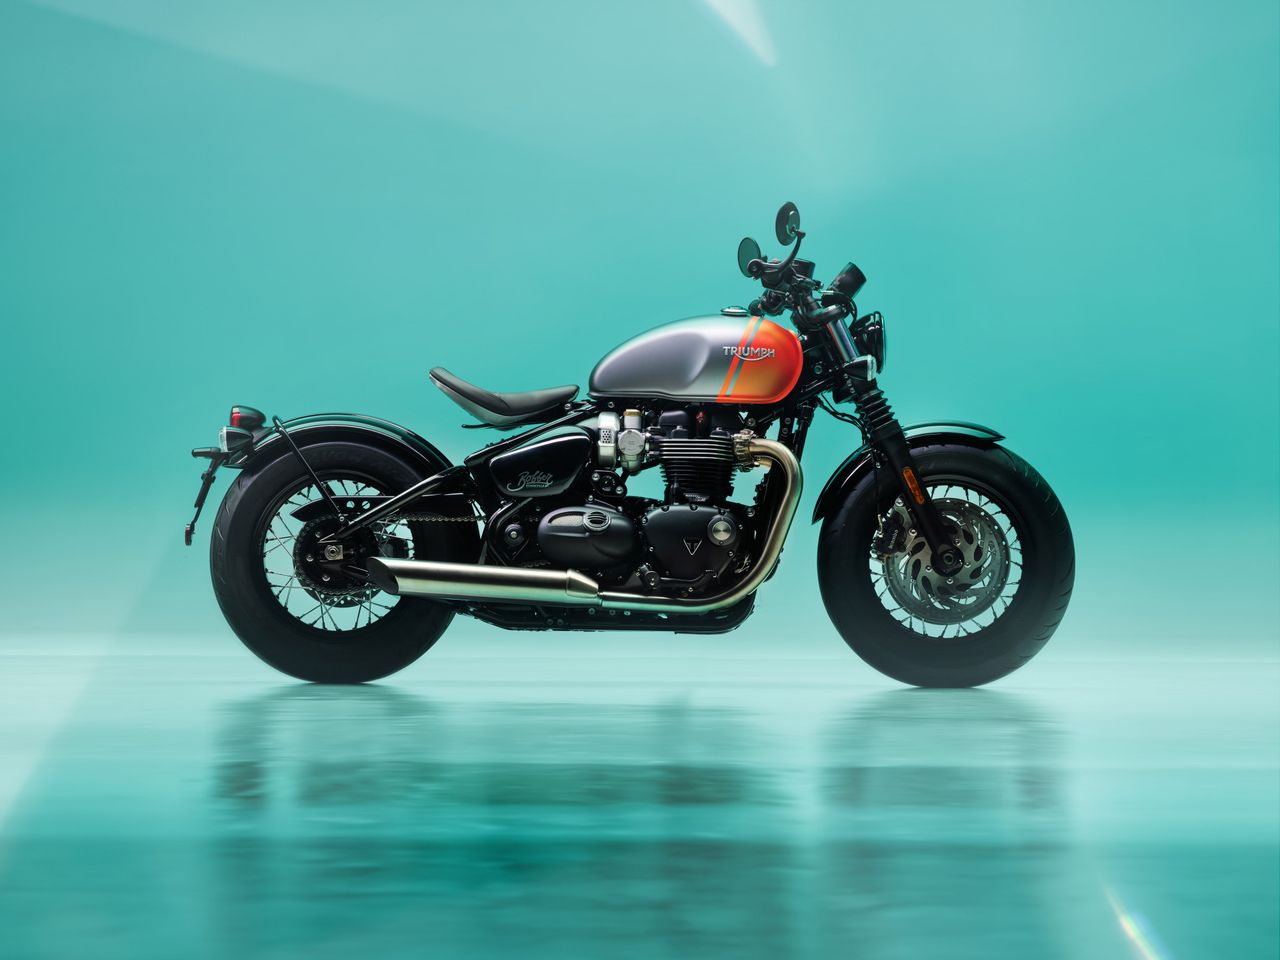 Triumph reveals striking new paint schemes for 2025 motorcycle lineup